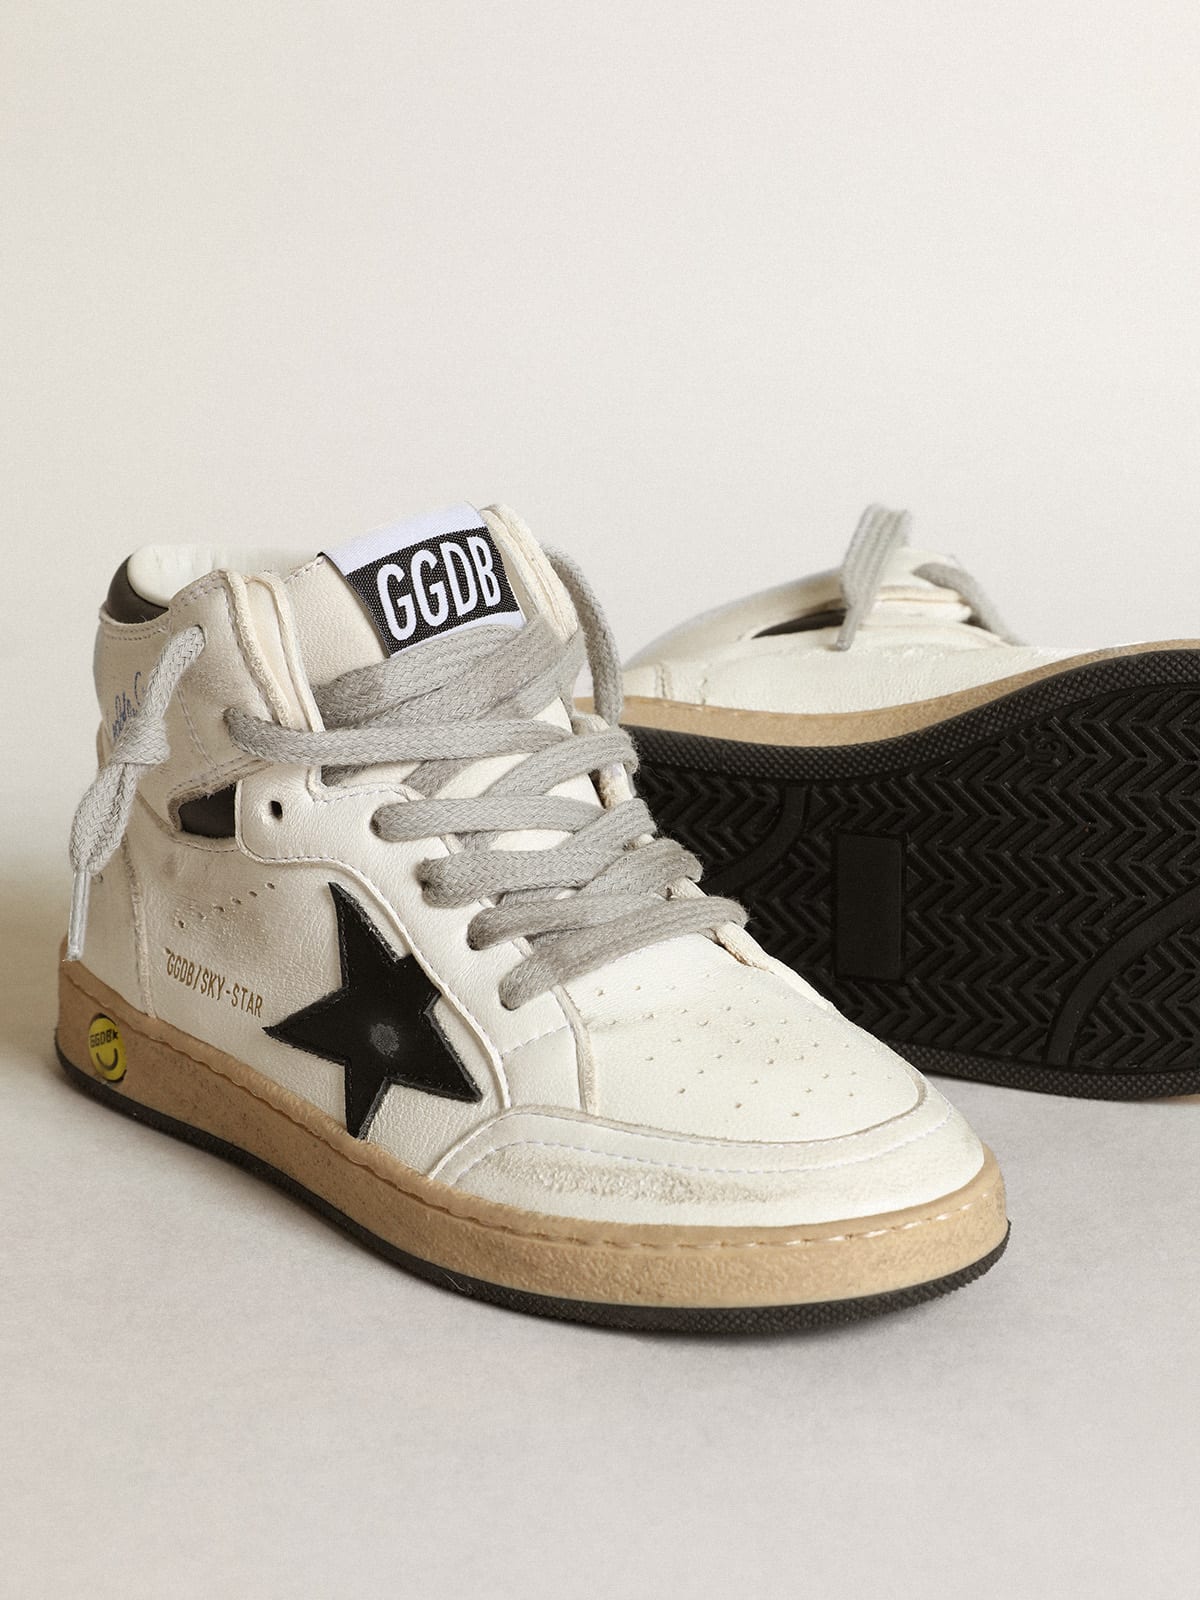 Golden Goose - Young Sky-Star in white nappa with black star and heel tab in 